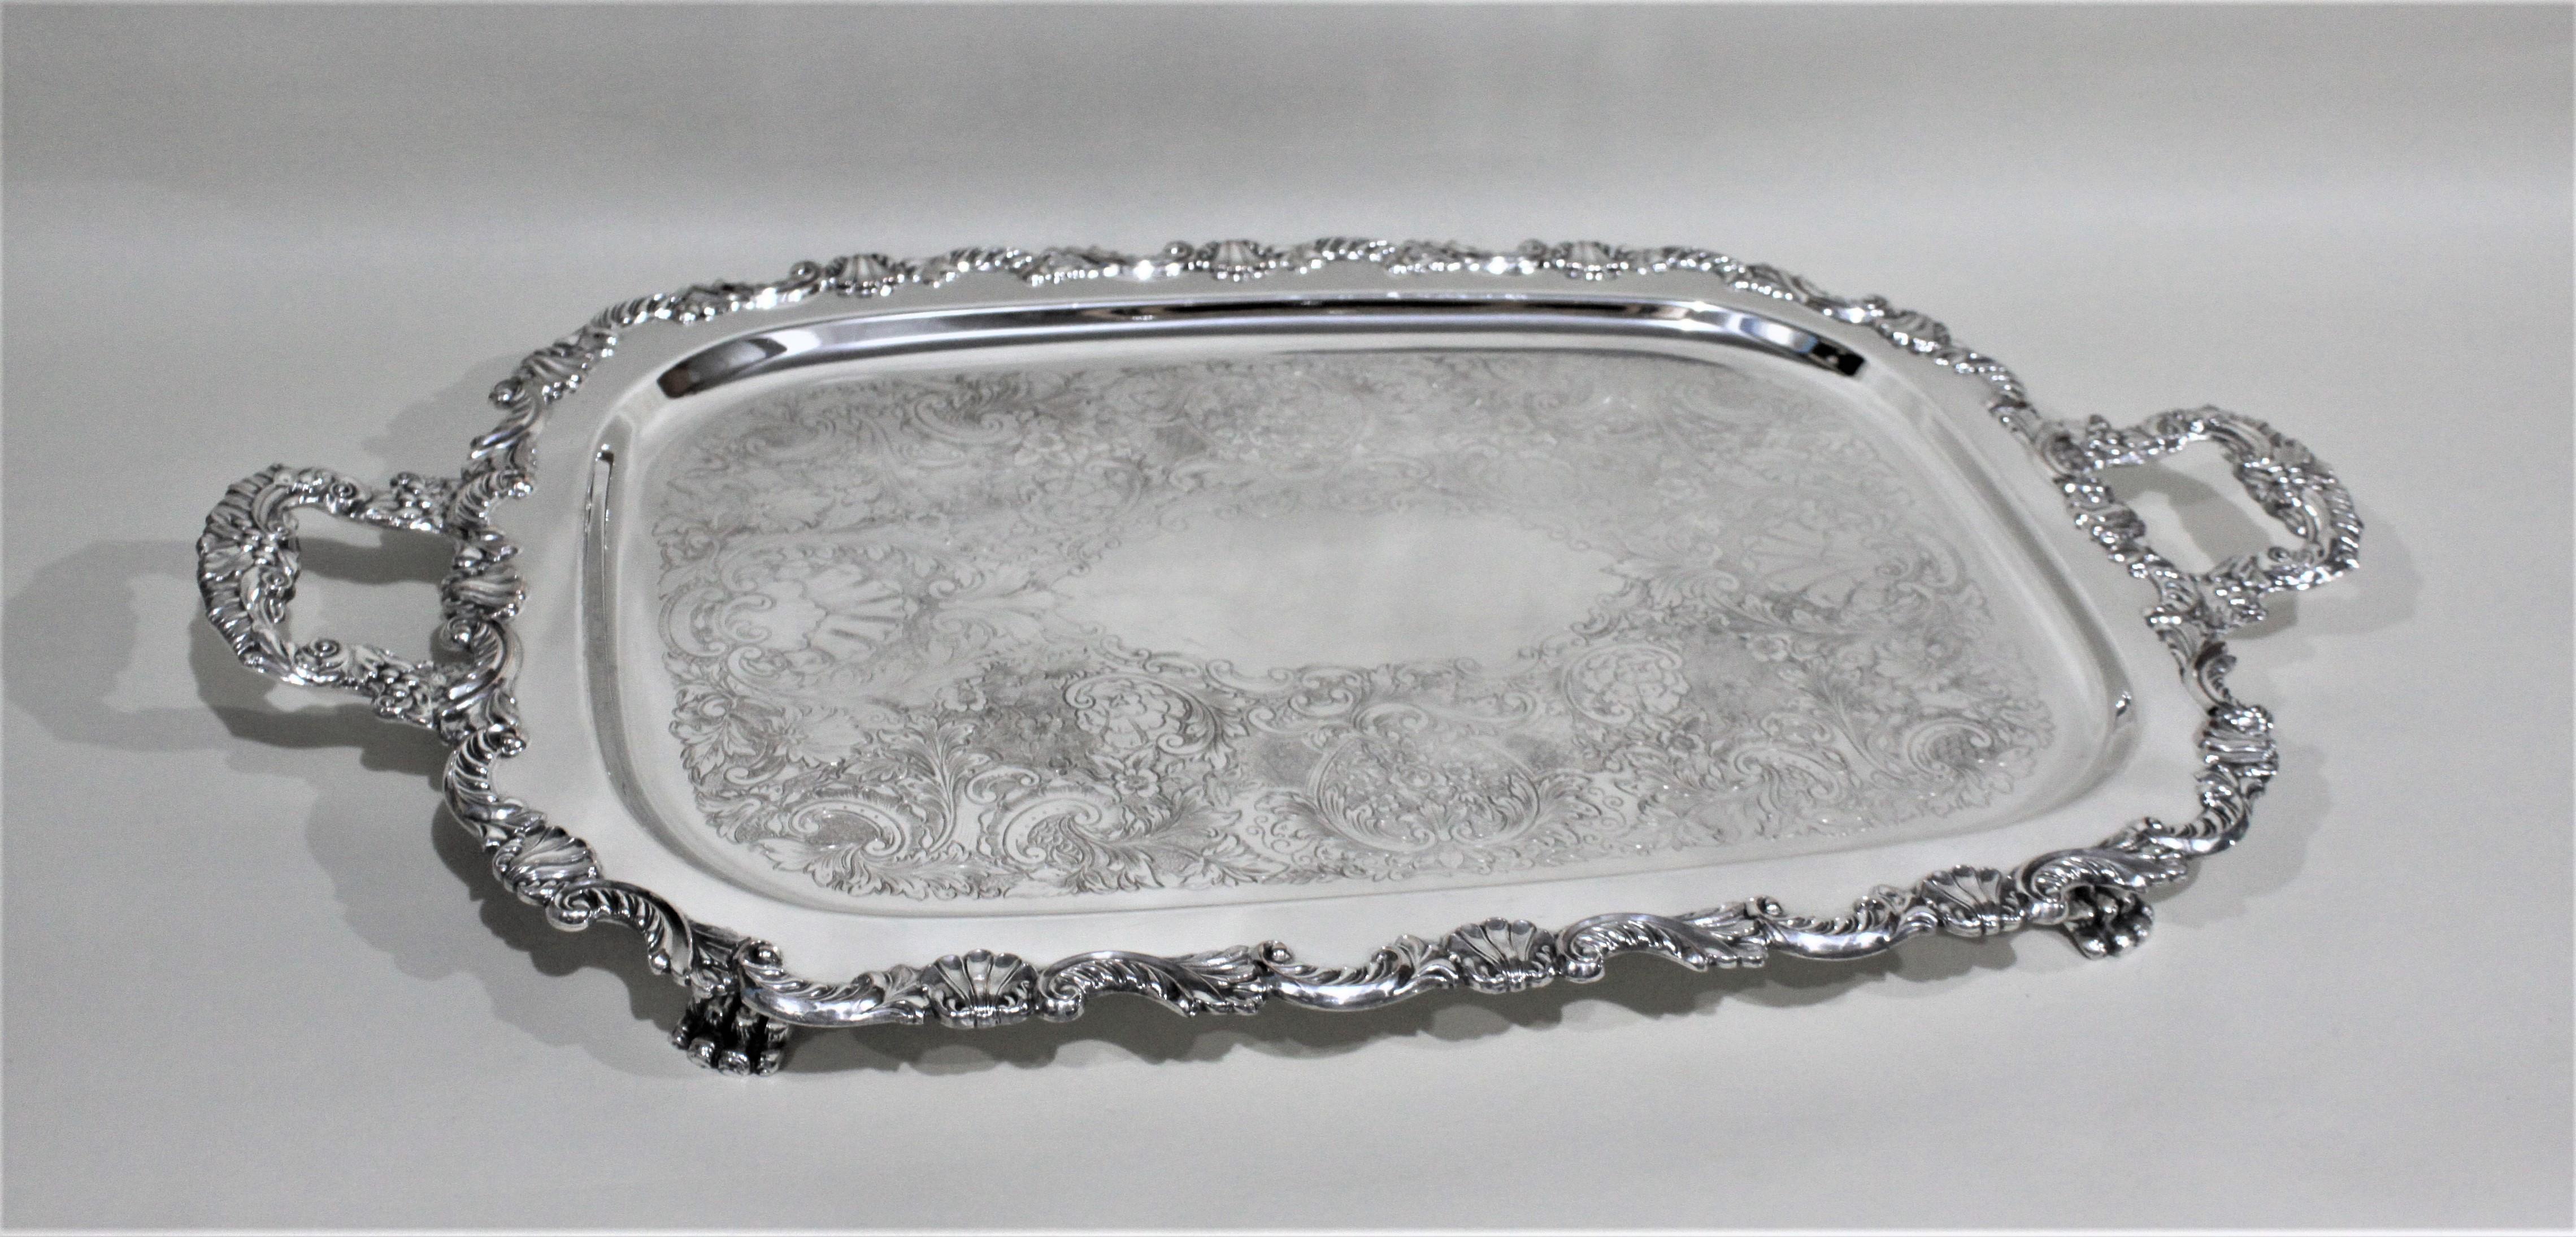 This large and rectangular shaped silver plated serving tray is presumed to have been made in England between 1900 and the 1920 time and has been done in the Victorian style. The tray has very ornate handles and surround and is intricately engraved